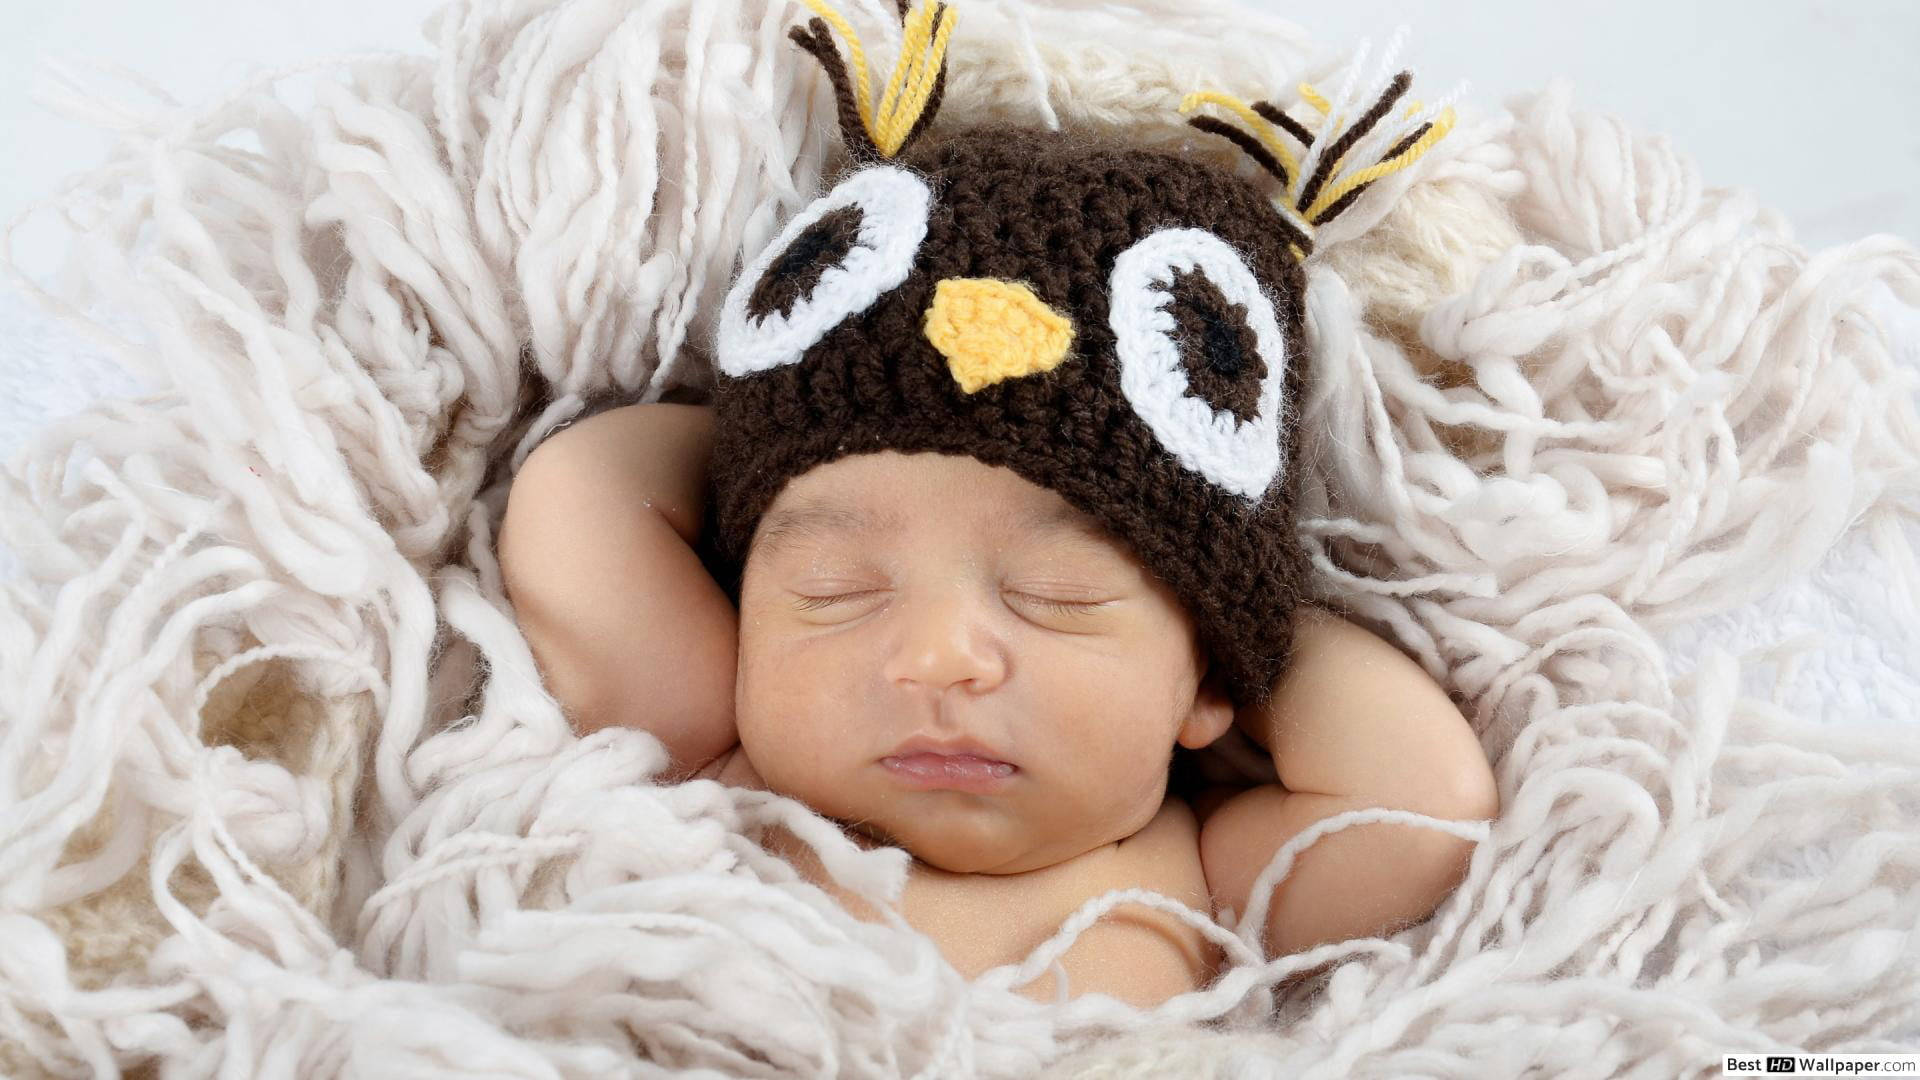 Cute Sleeping Baby Pictorial Background